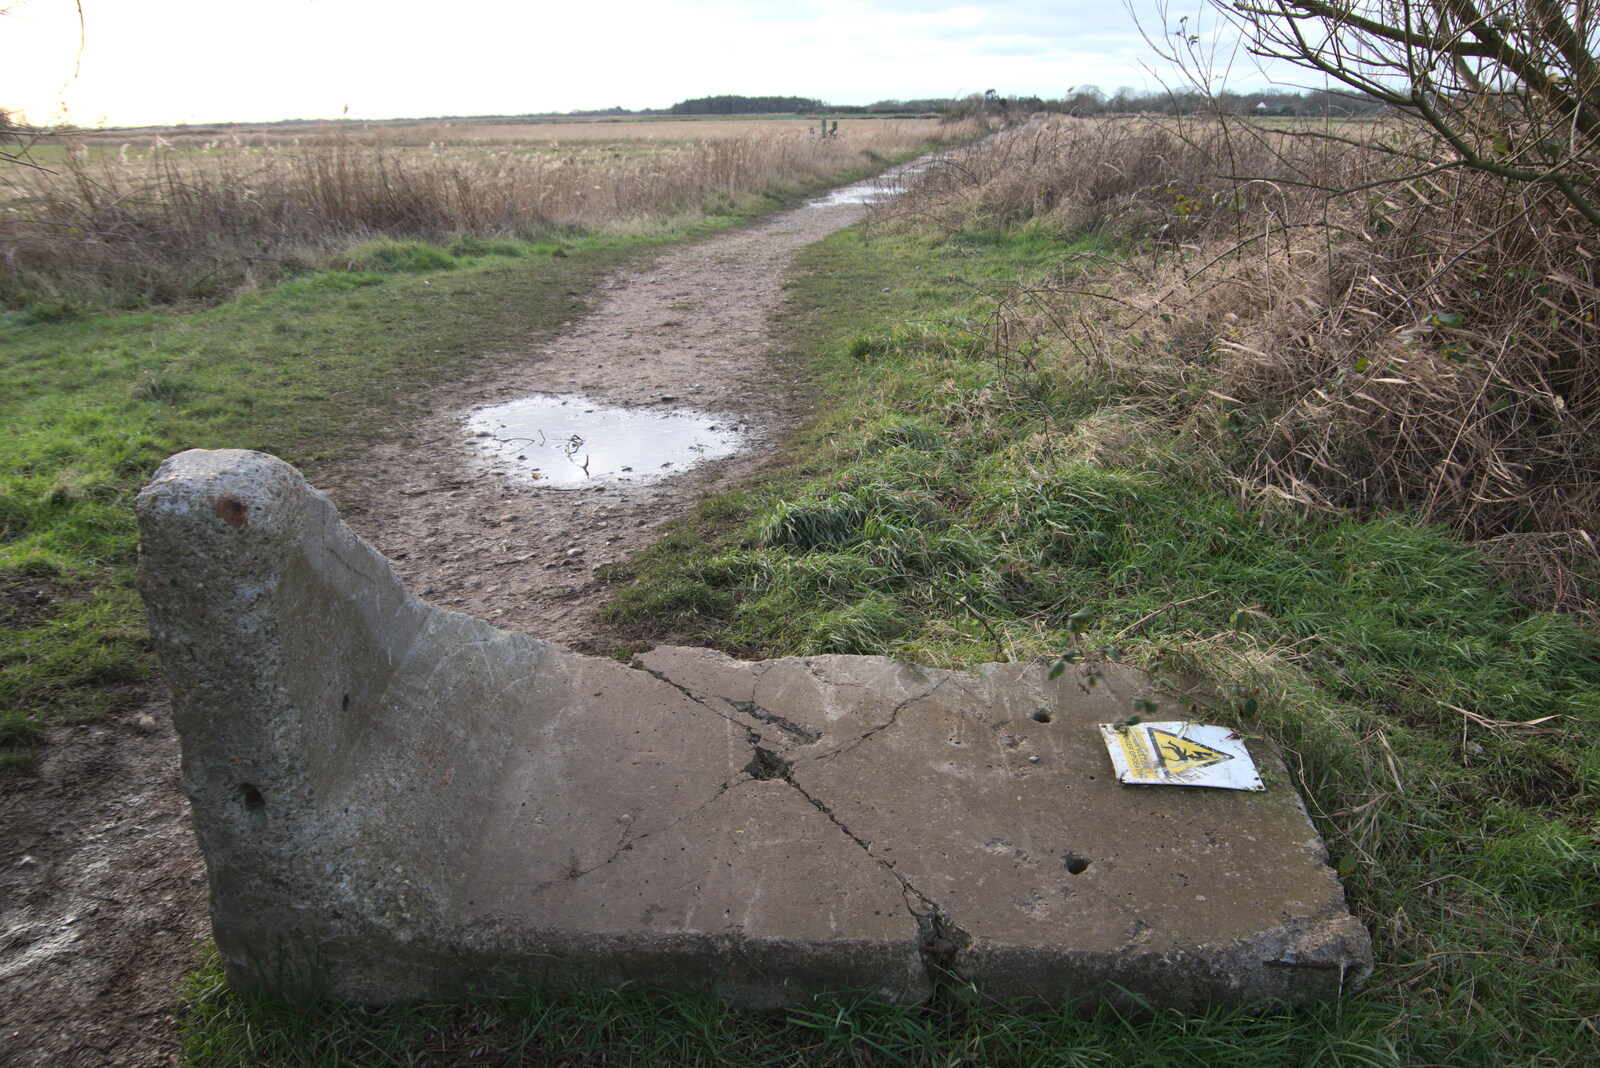 A weather-worn concrete block from To See the Seals, Horsey Gap, Norfolk - 10th January 2020